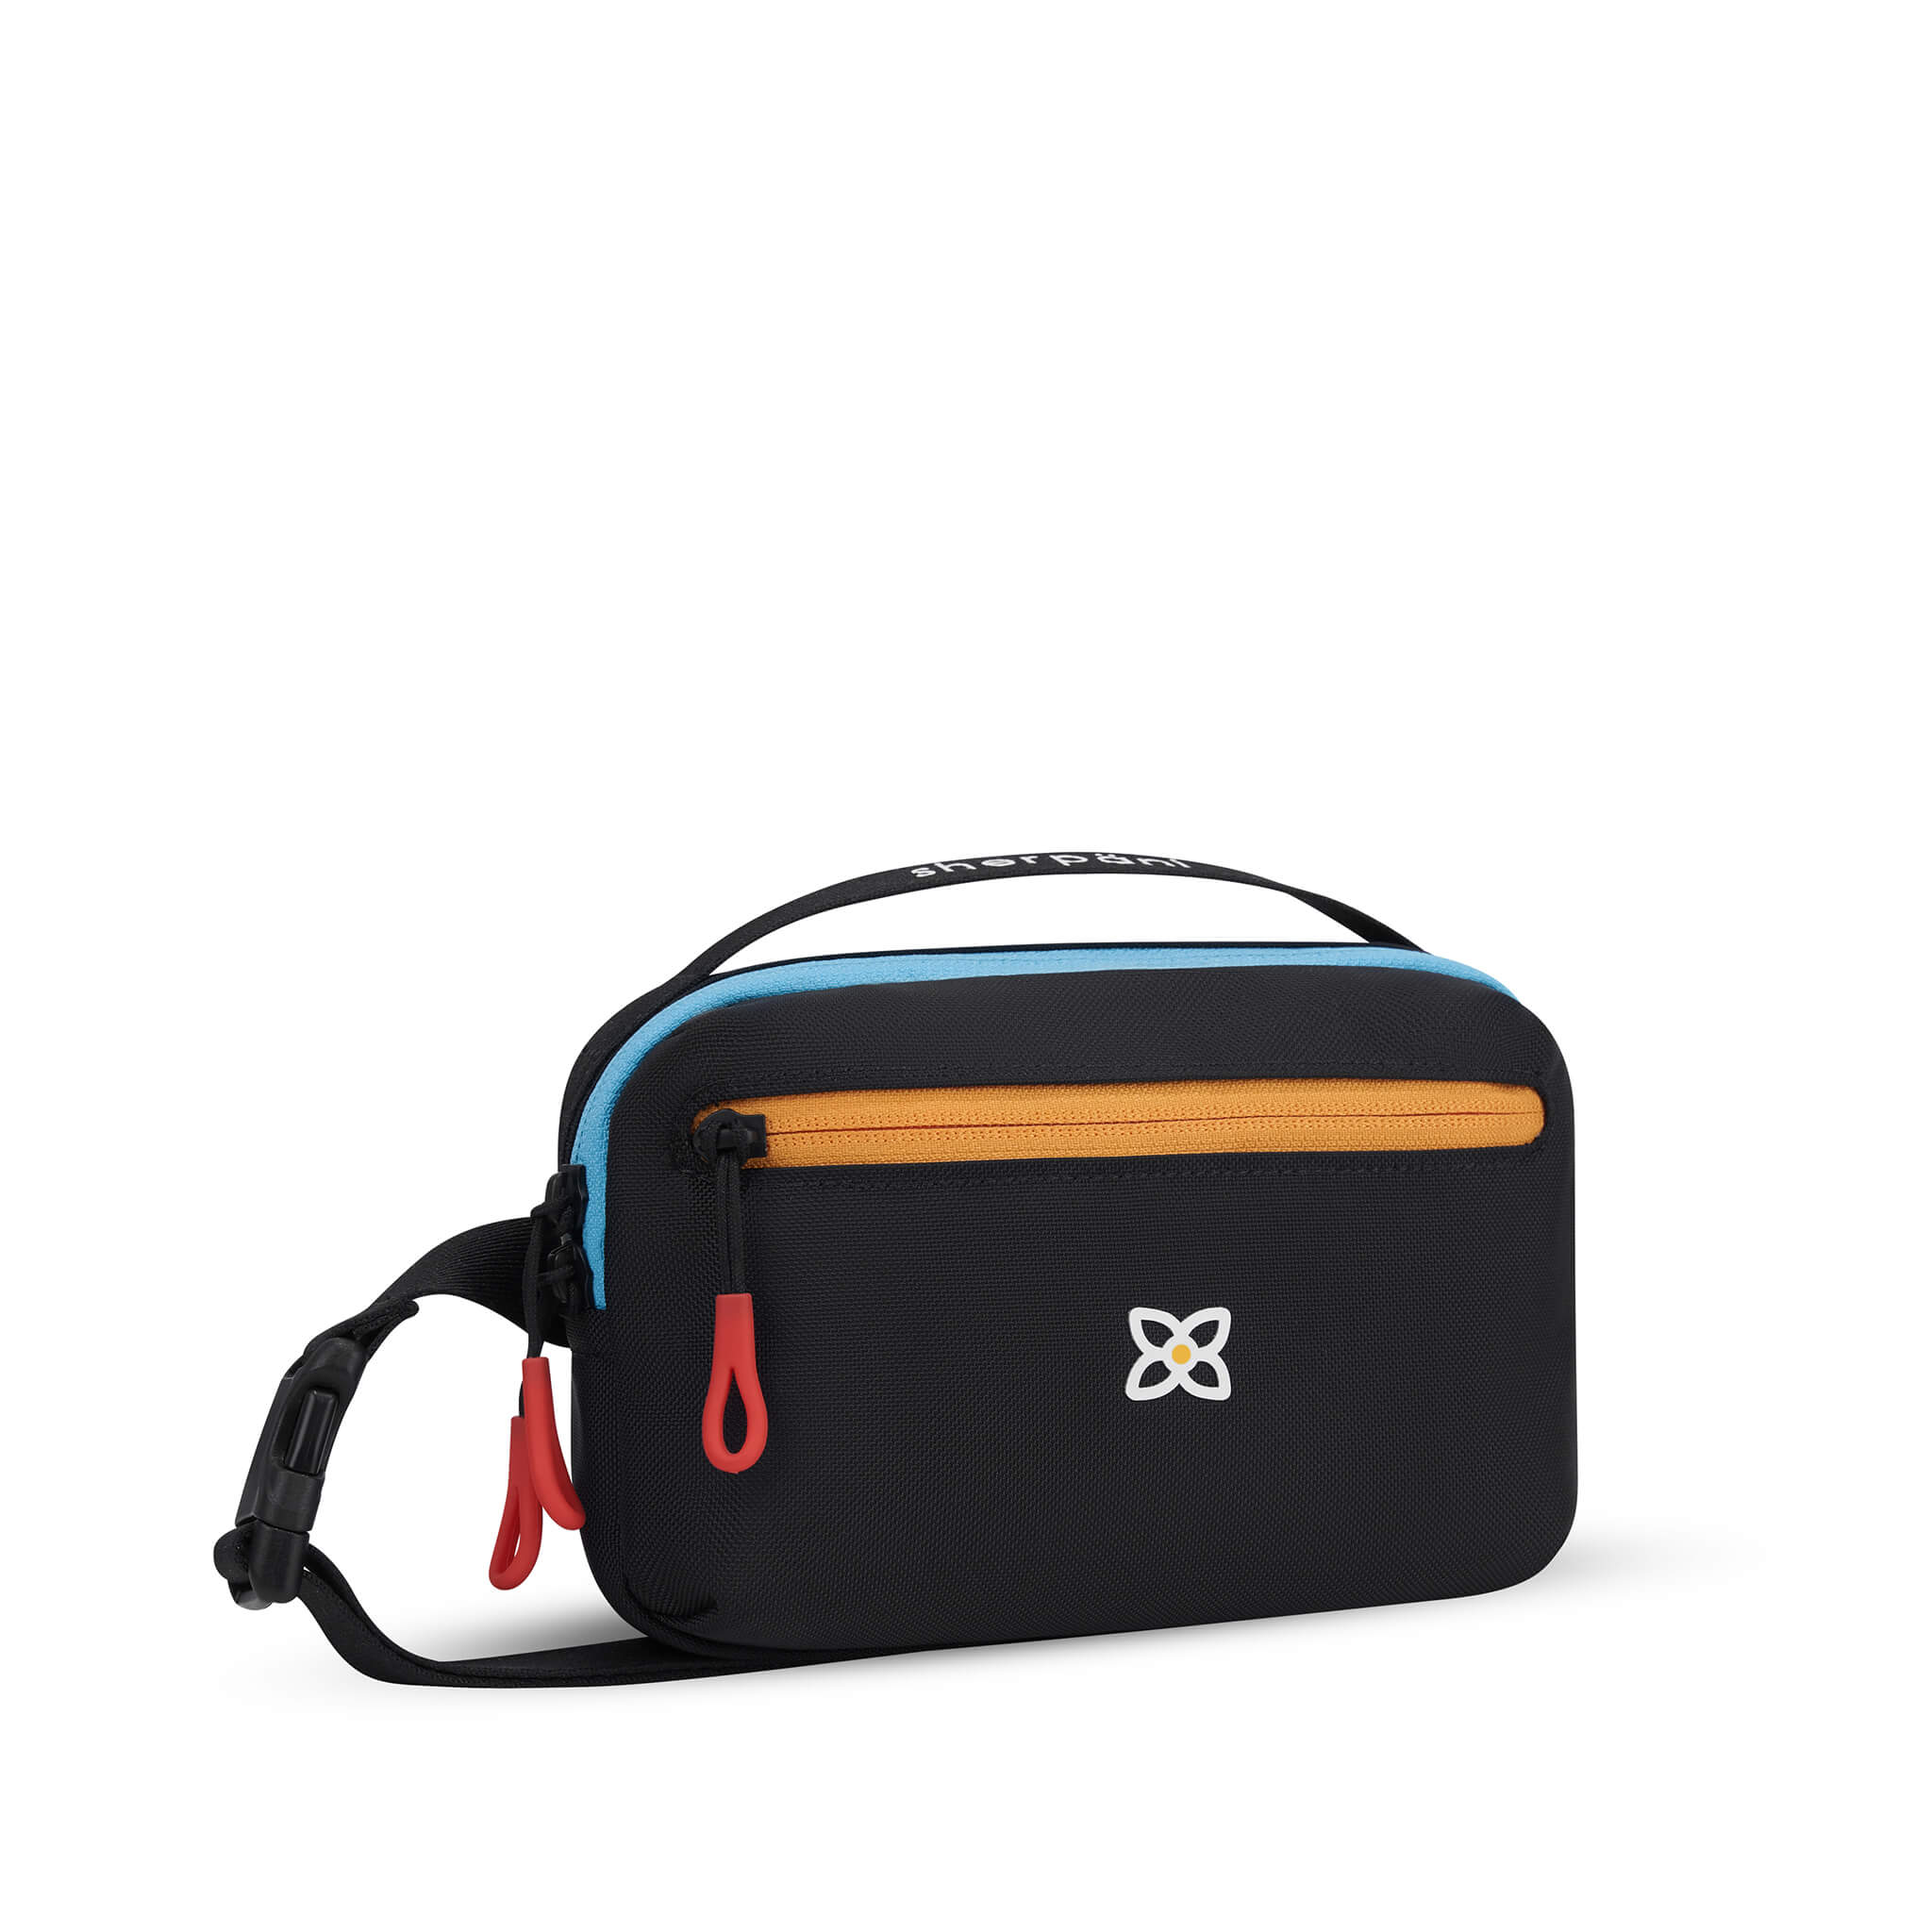 Angled front view of Sherpani’s fanny pack, the Hyk in Chromatic. The bag is black with yellow and blue accents. There is an external zipper pocket on the front of the bag. Easy-pull zippers are accented in red. The fanny pack features an adjustable strap with a buckle. #color_chromatic